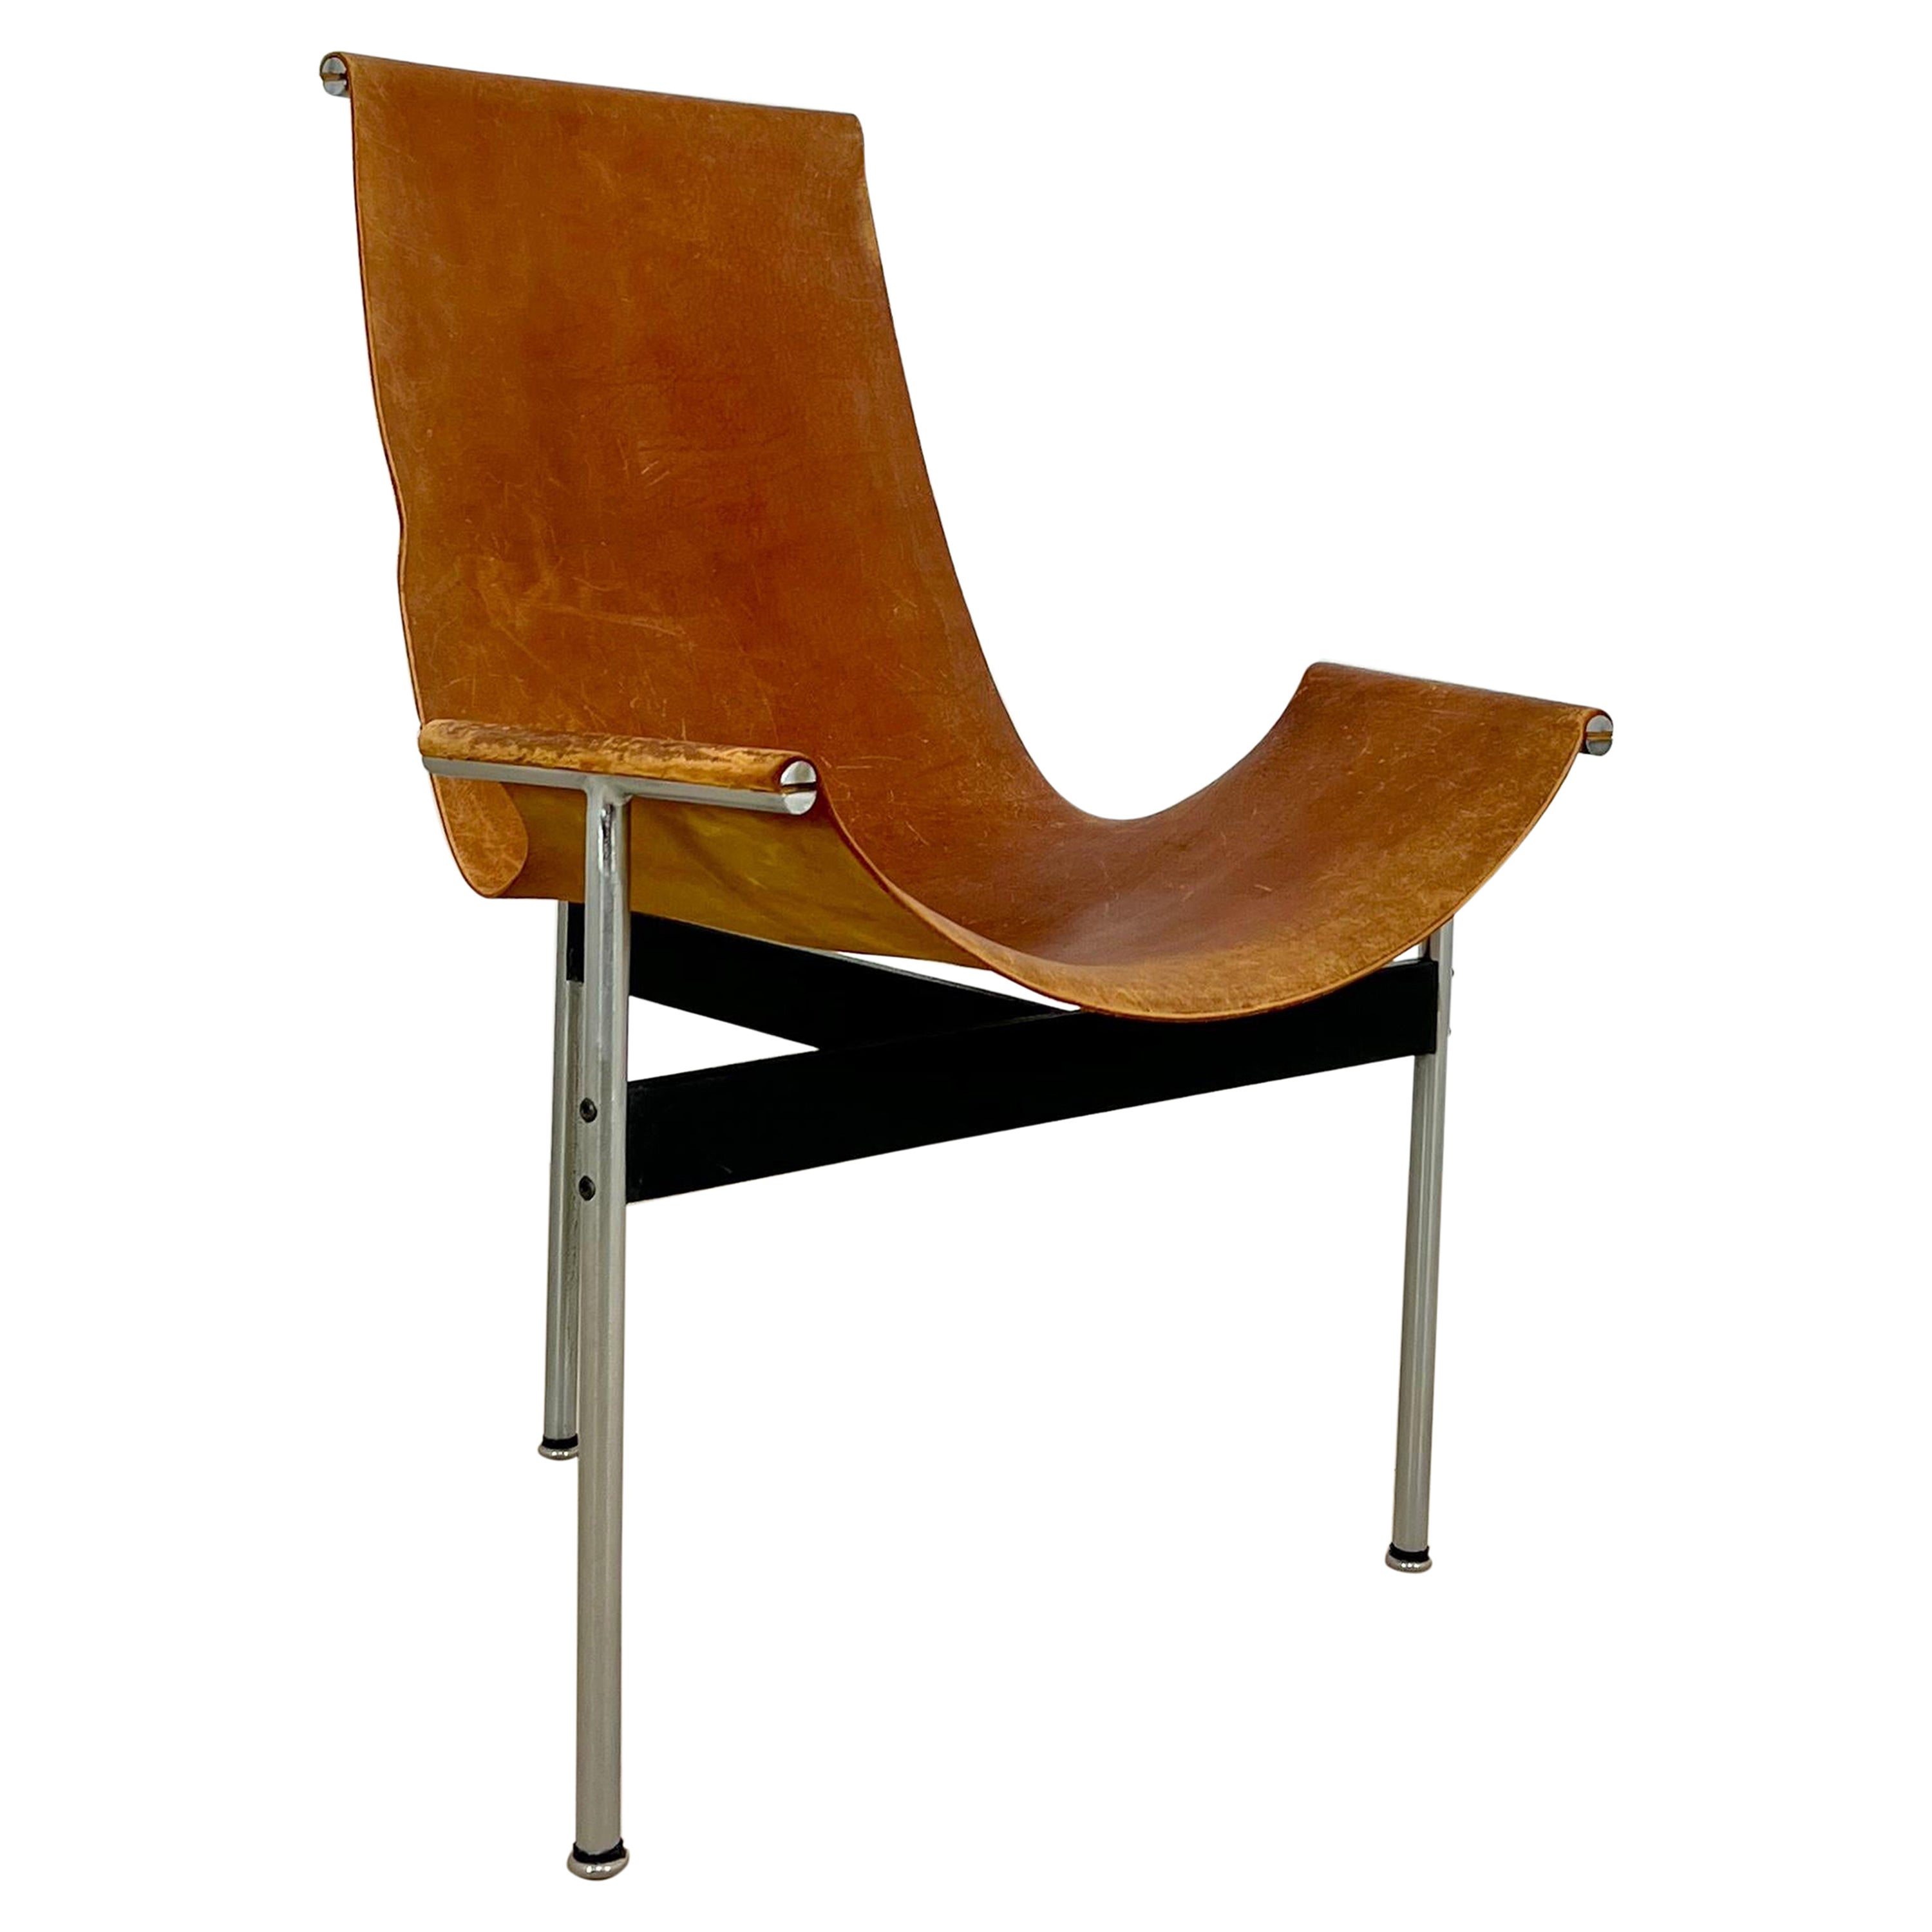 Model 3LC T Chair by William Katavolos for Laverne International, 1952